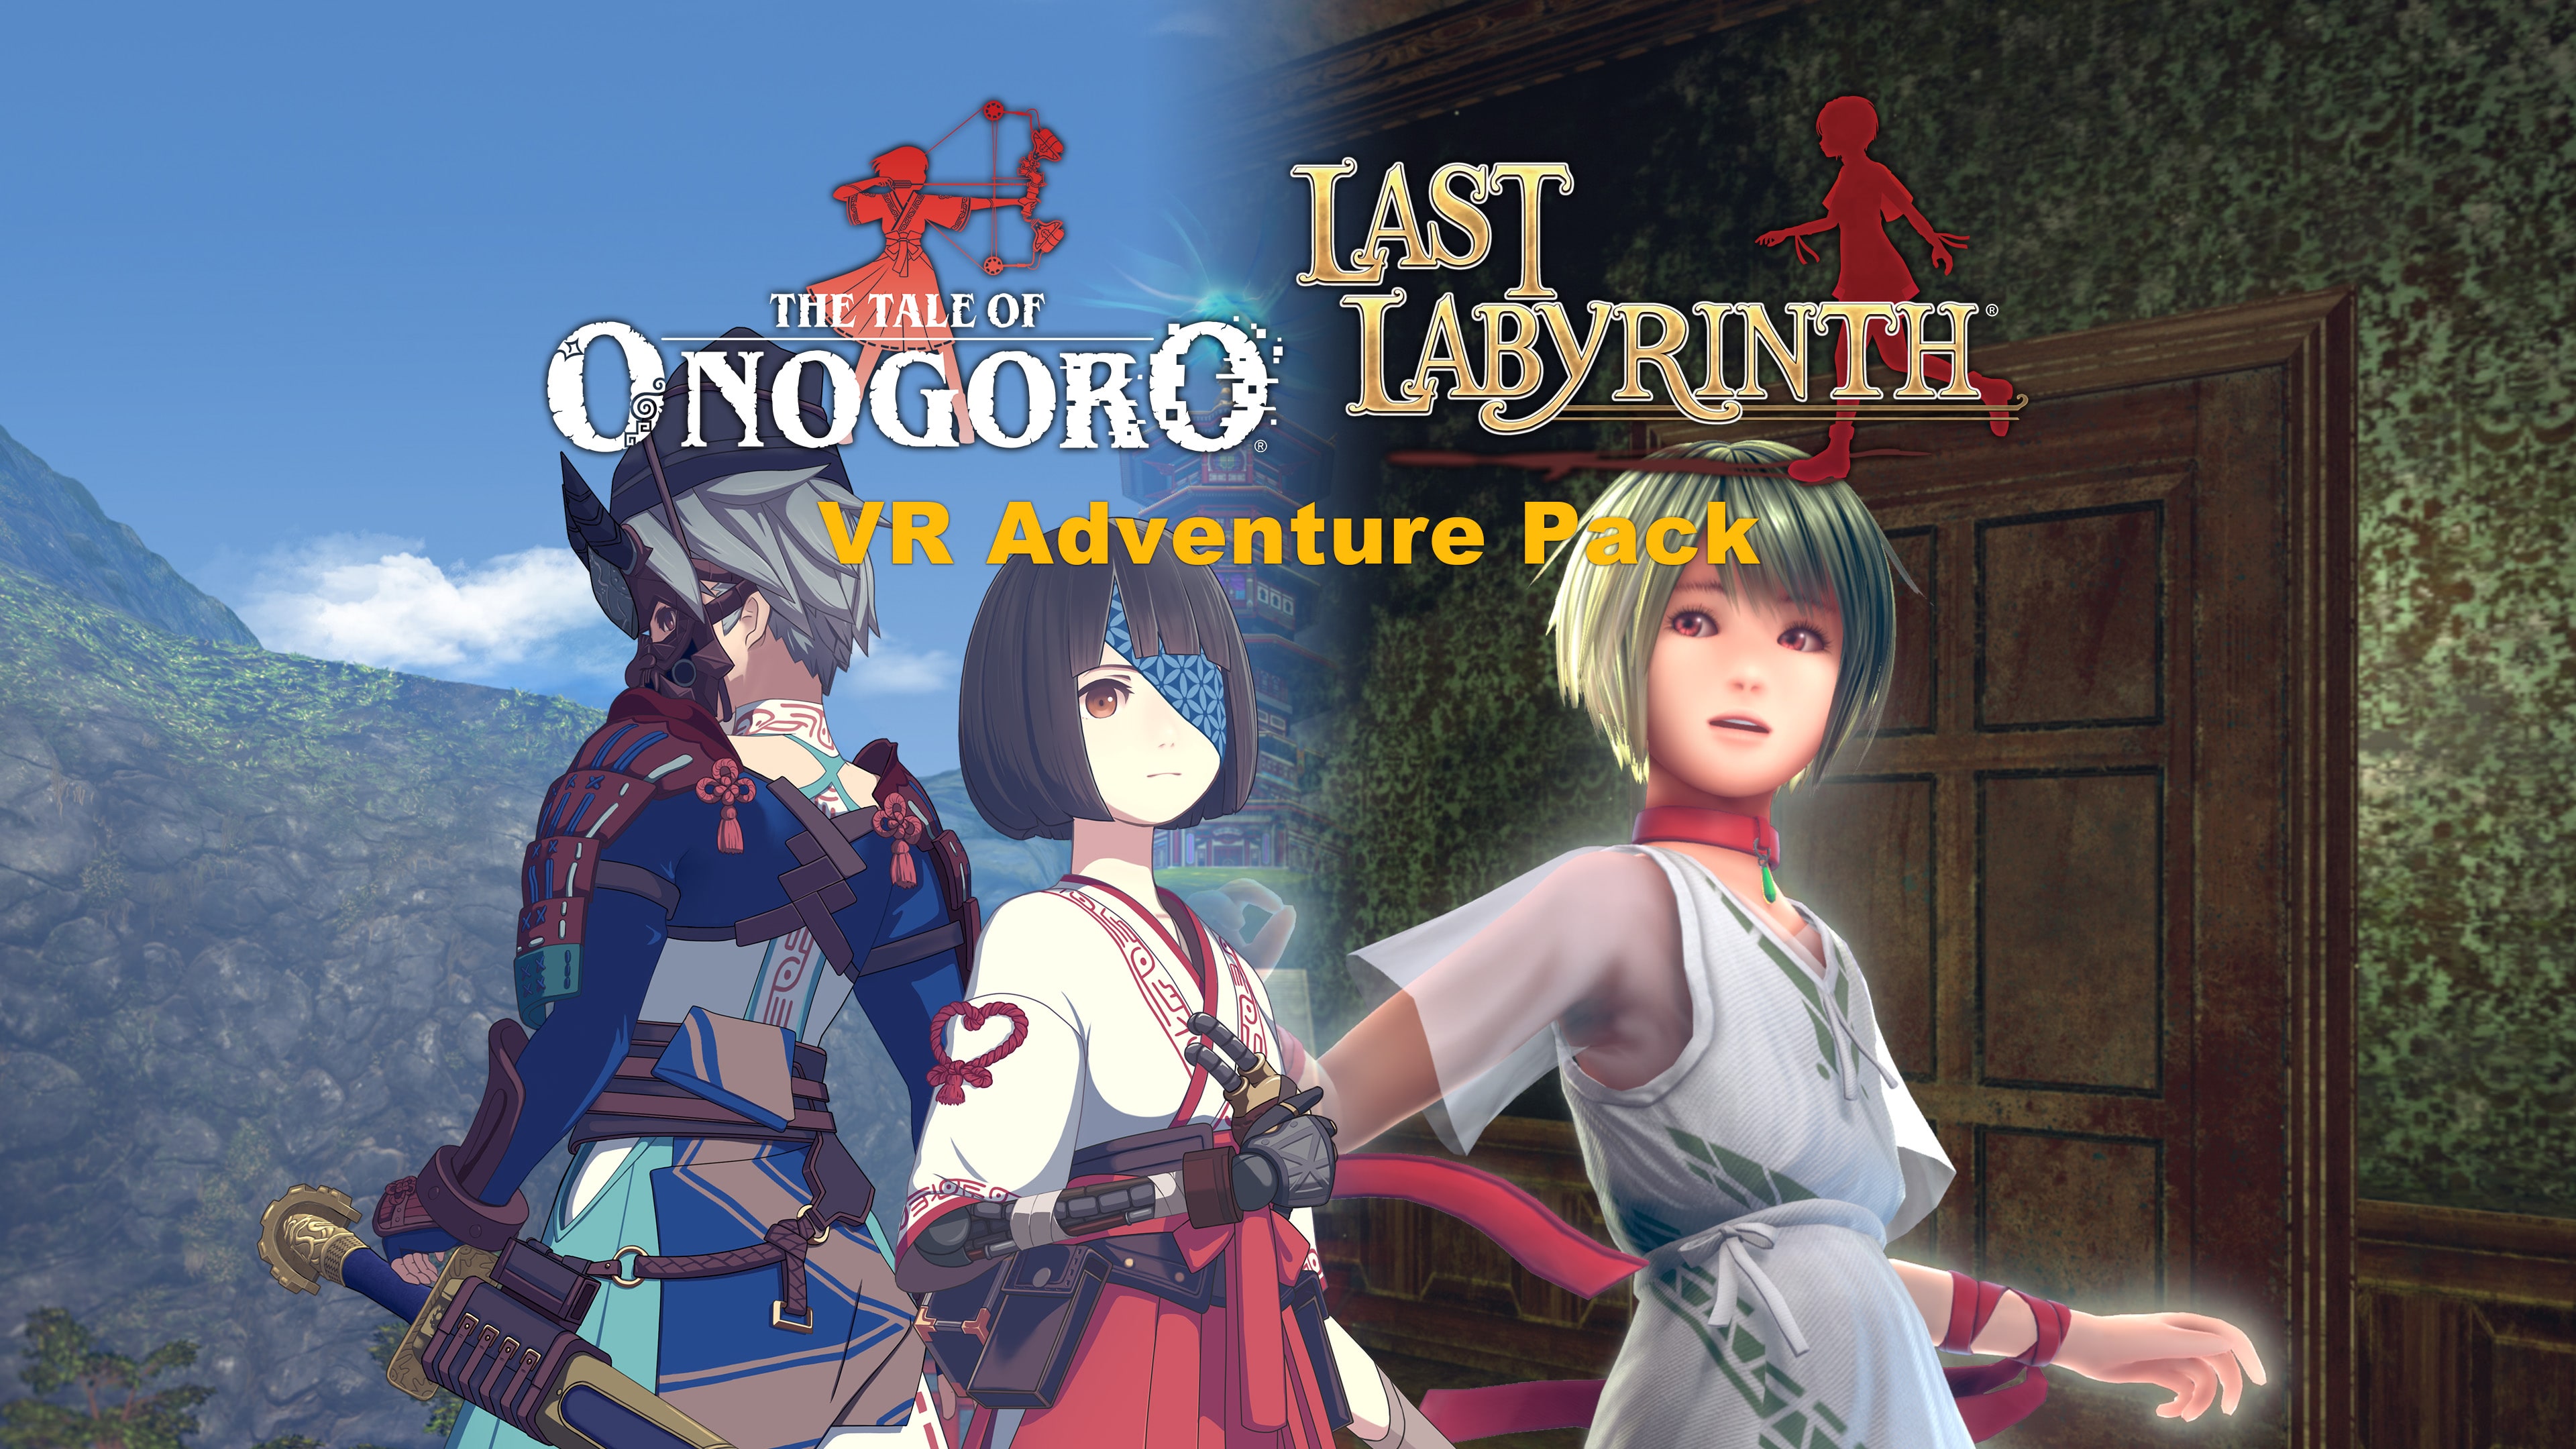 The Tale of Onogoro + Last Labyrinth VR Adventure Pack